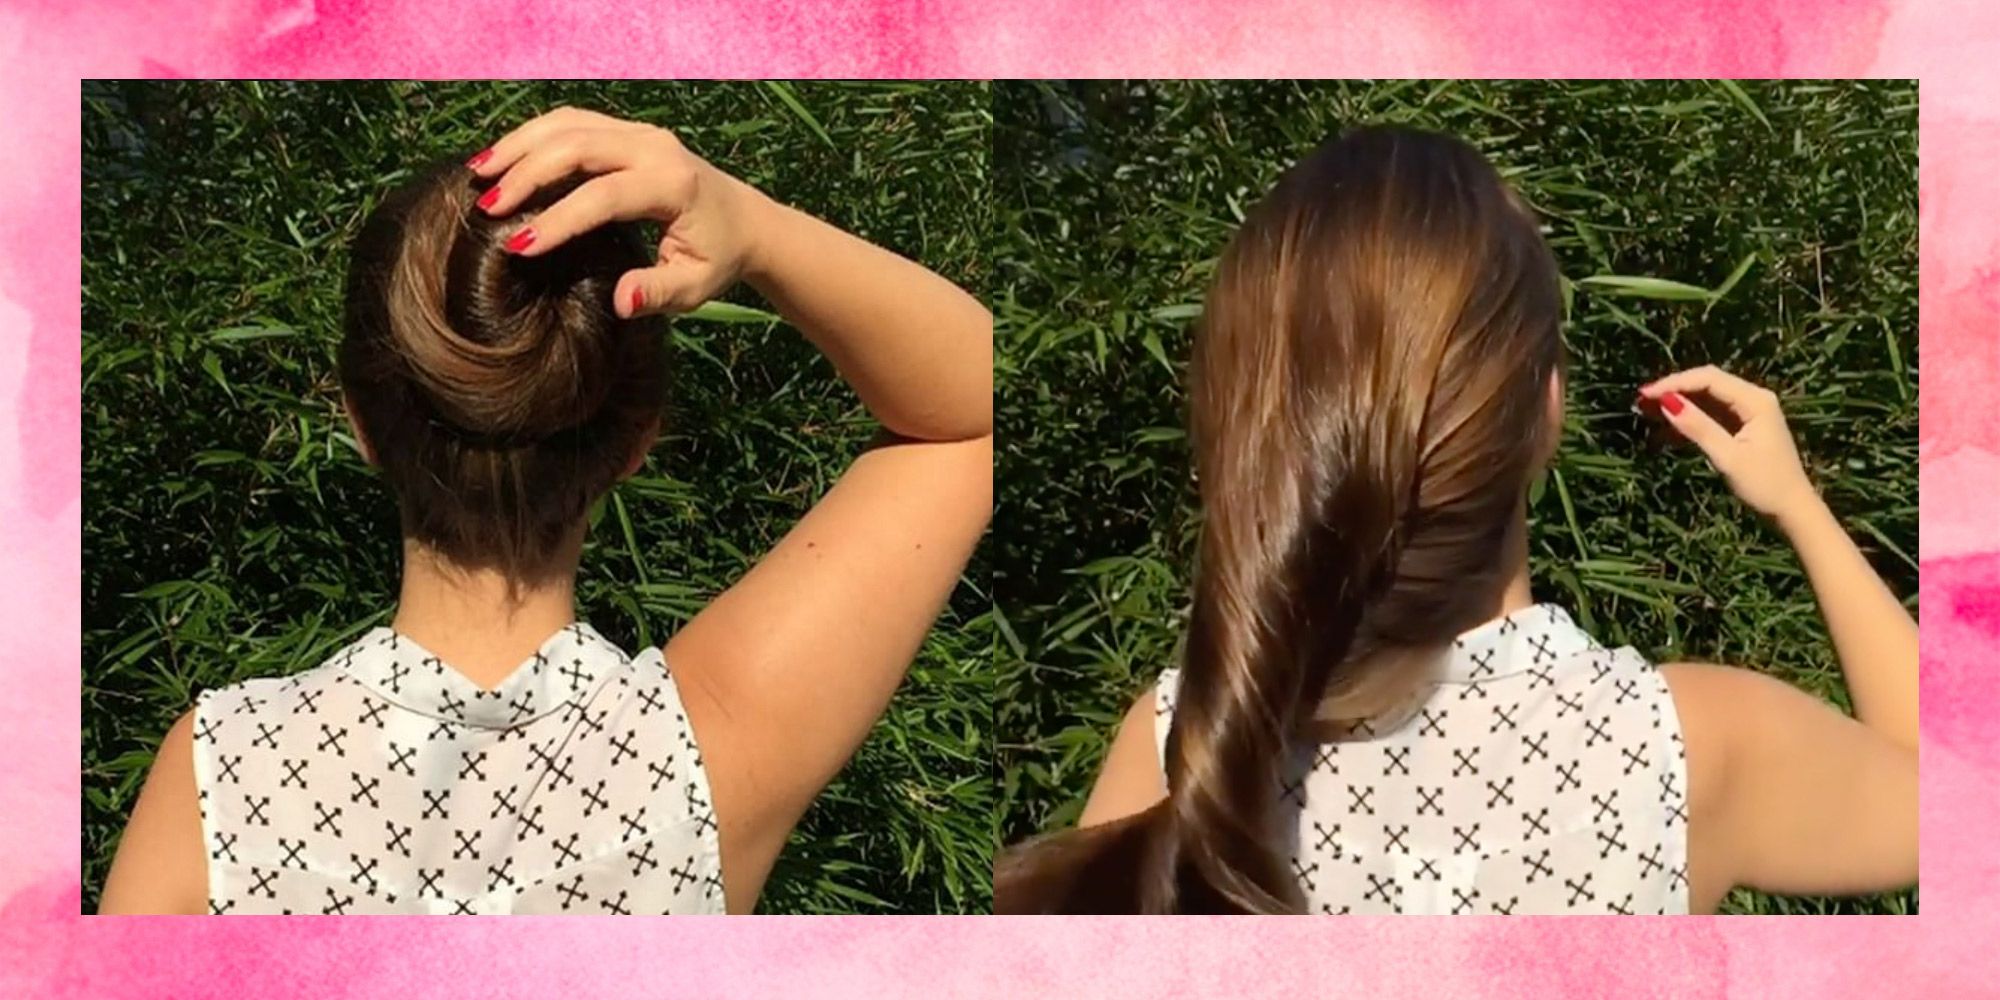 Bun Dropping Is the ~Weird~ New Instagram Trend We Can't Stop Watching